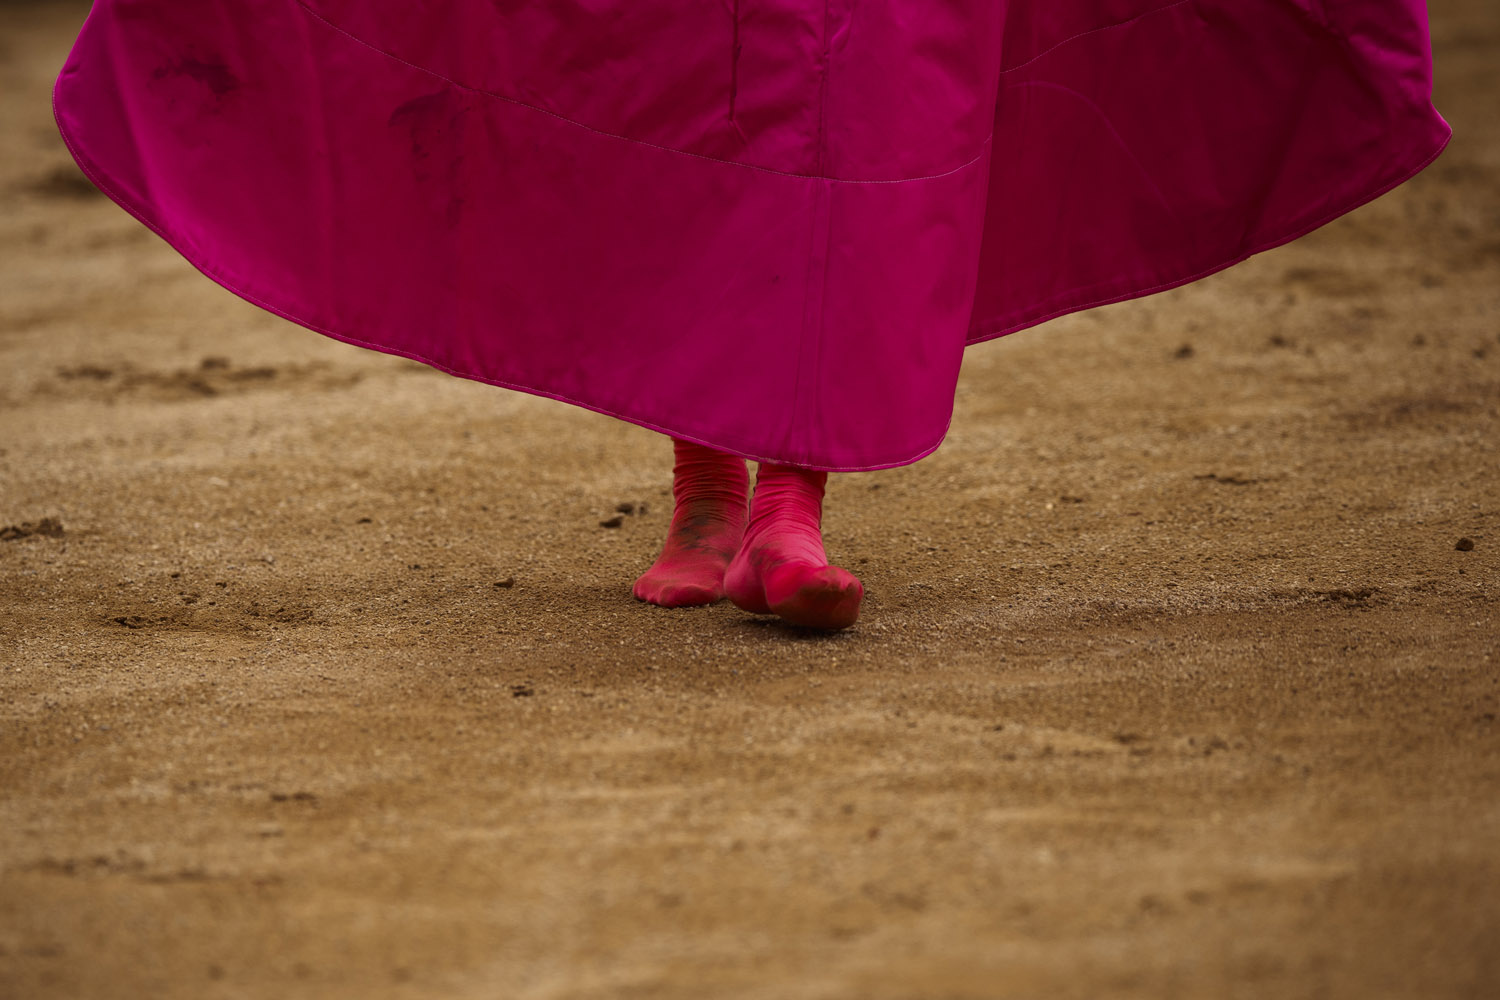 July 14, 2013. Spanish bullfighter Jimenez Fortes performs with out shoes during a bullfight of the San Fermin festival, in Pamplona, Spain.